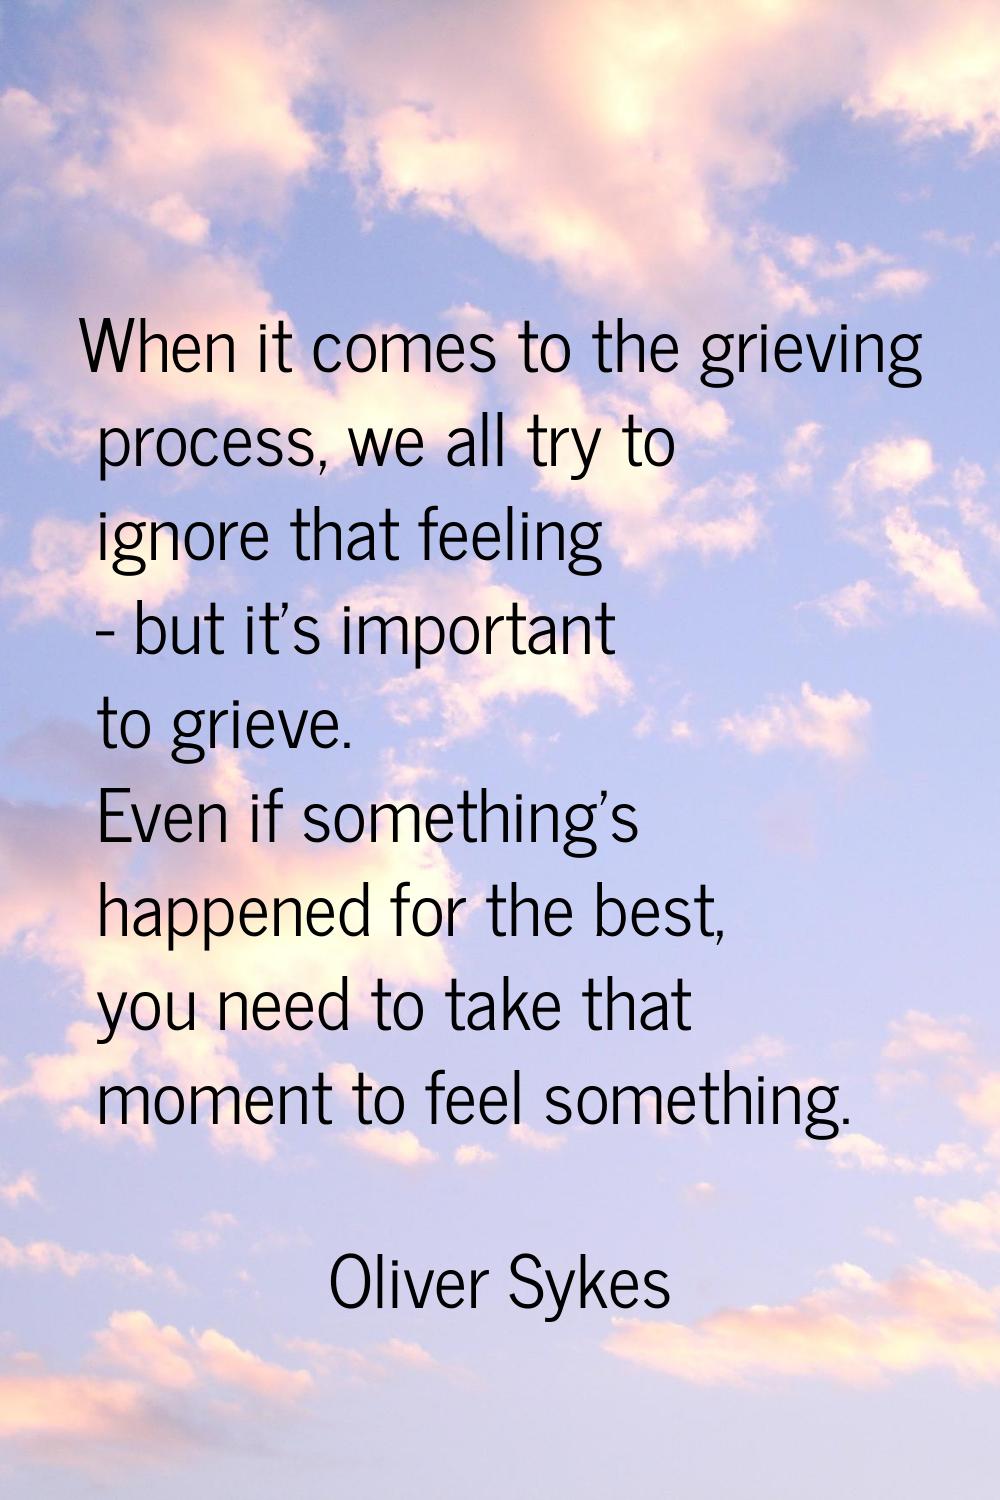 When it comes to the grieving process, we all try to ignore that feeling - but it's important to gr